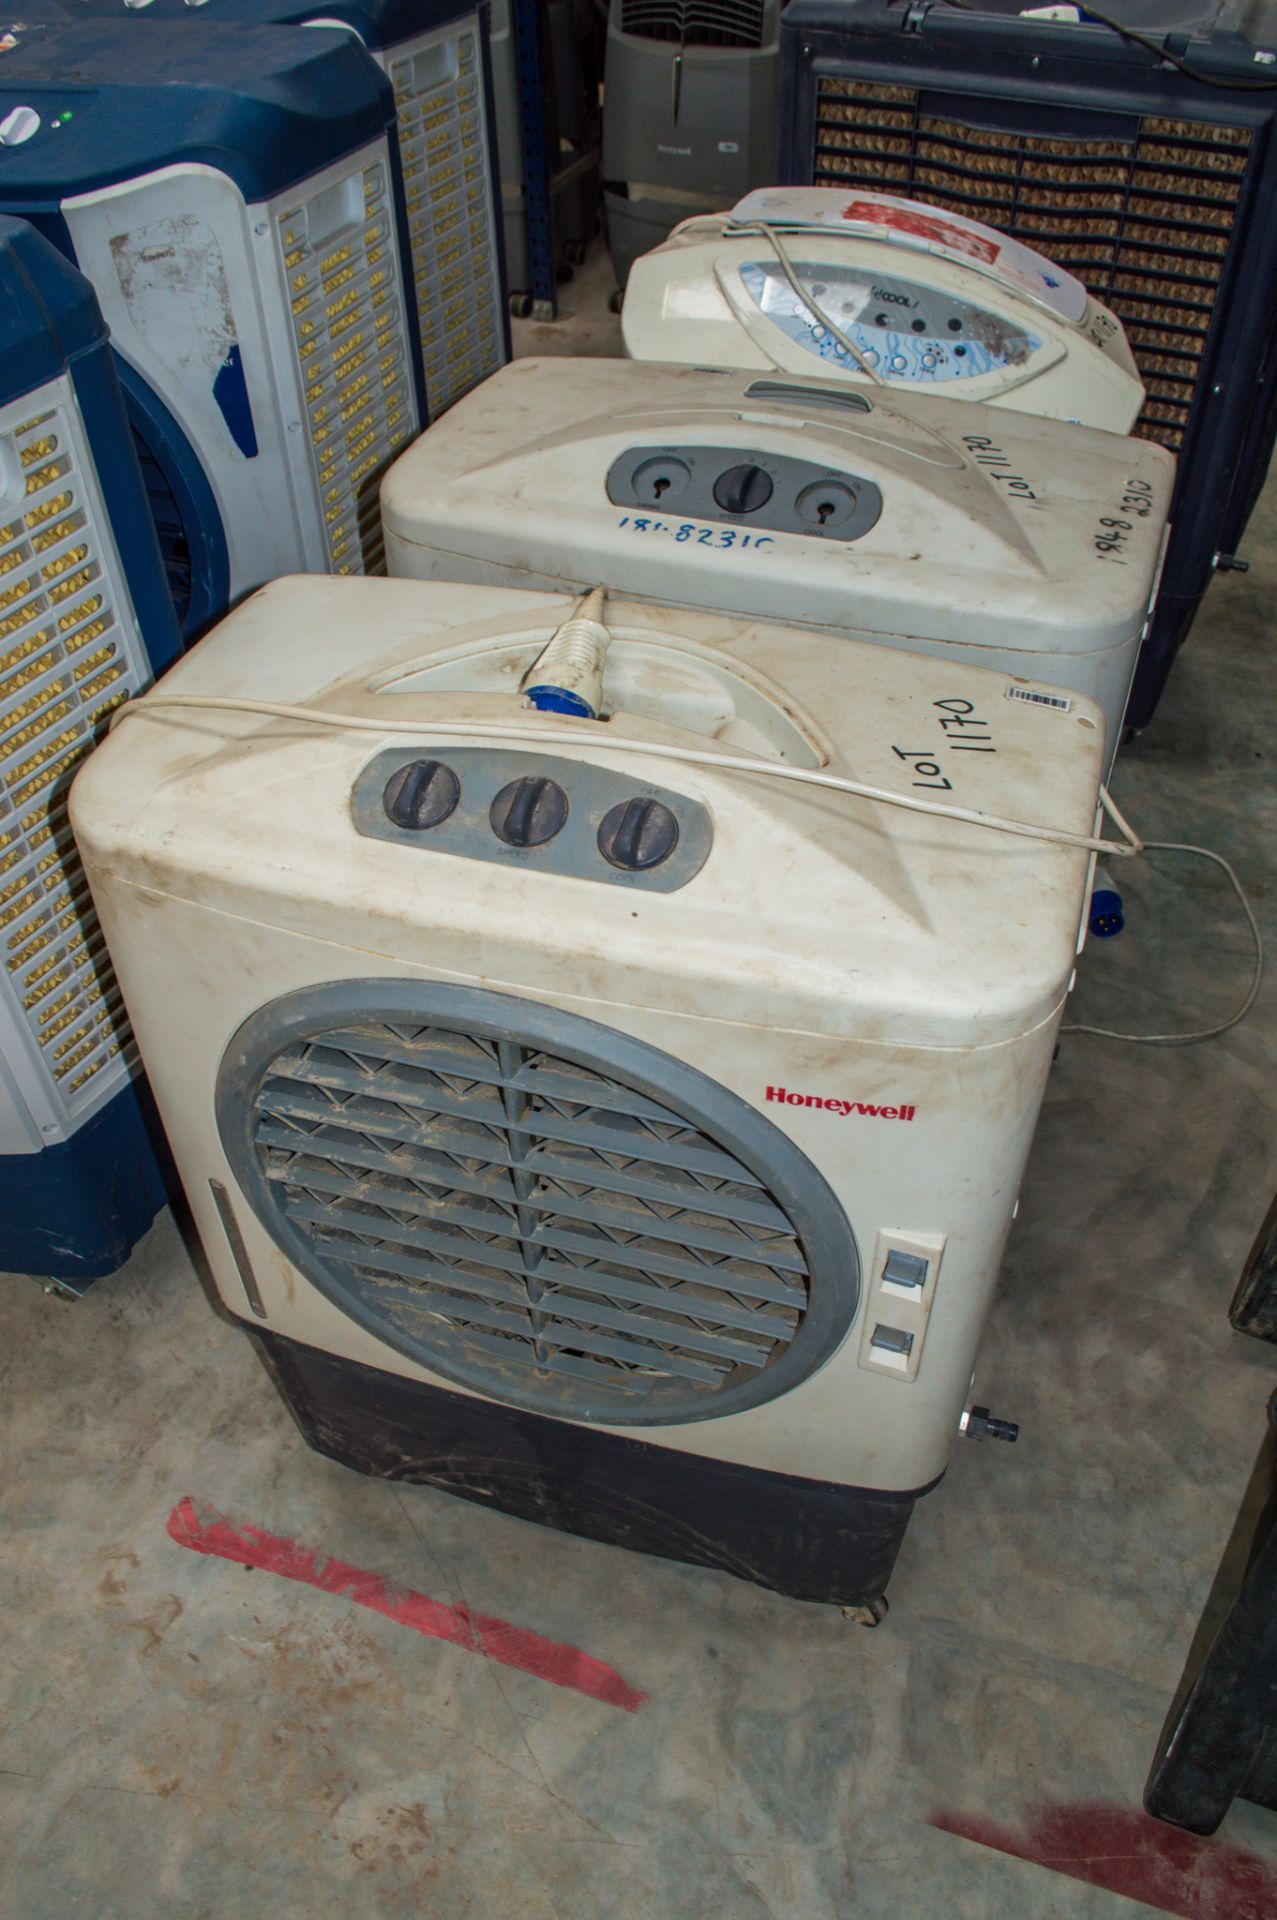 2 - Honeywell and 1 -Symphony 240v air conditioning units